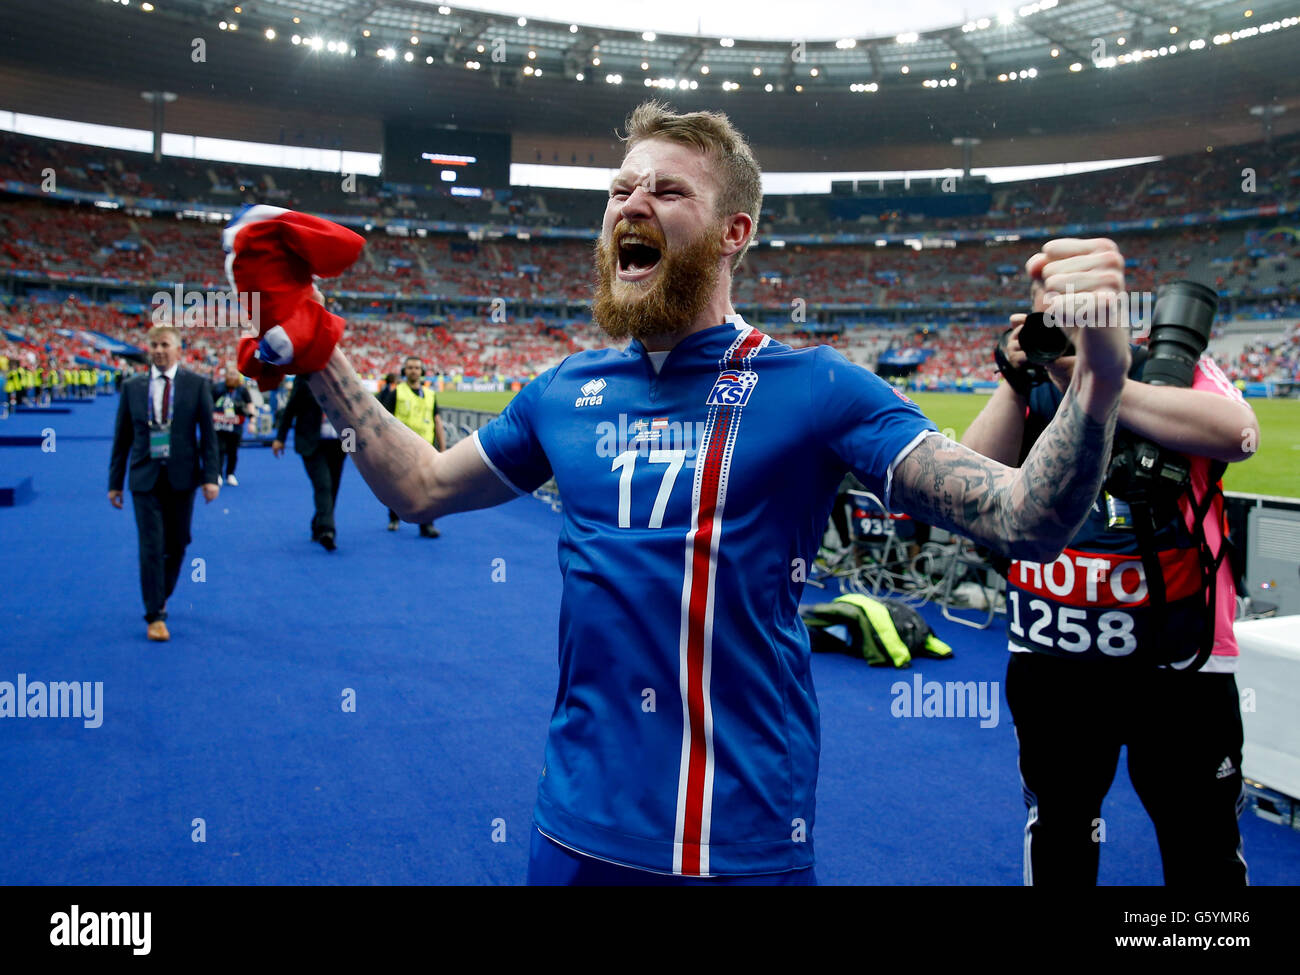 Iceland's Aron Gunnarsson celebrates qualifying for the last 16 round after the Euro 2016, Group F match at the Stade de France, Paris. Stock Photo